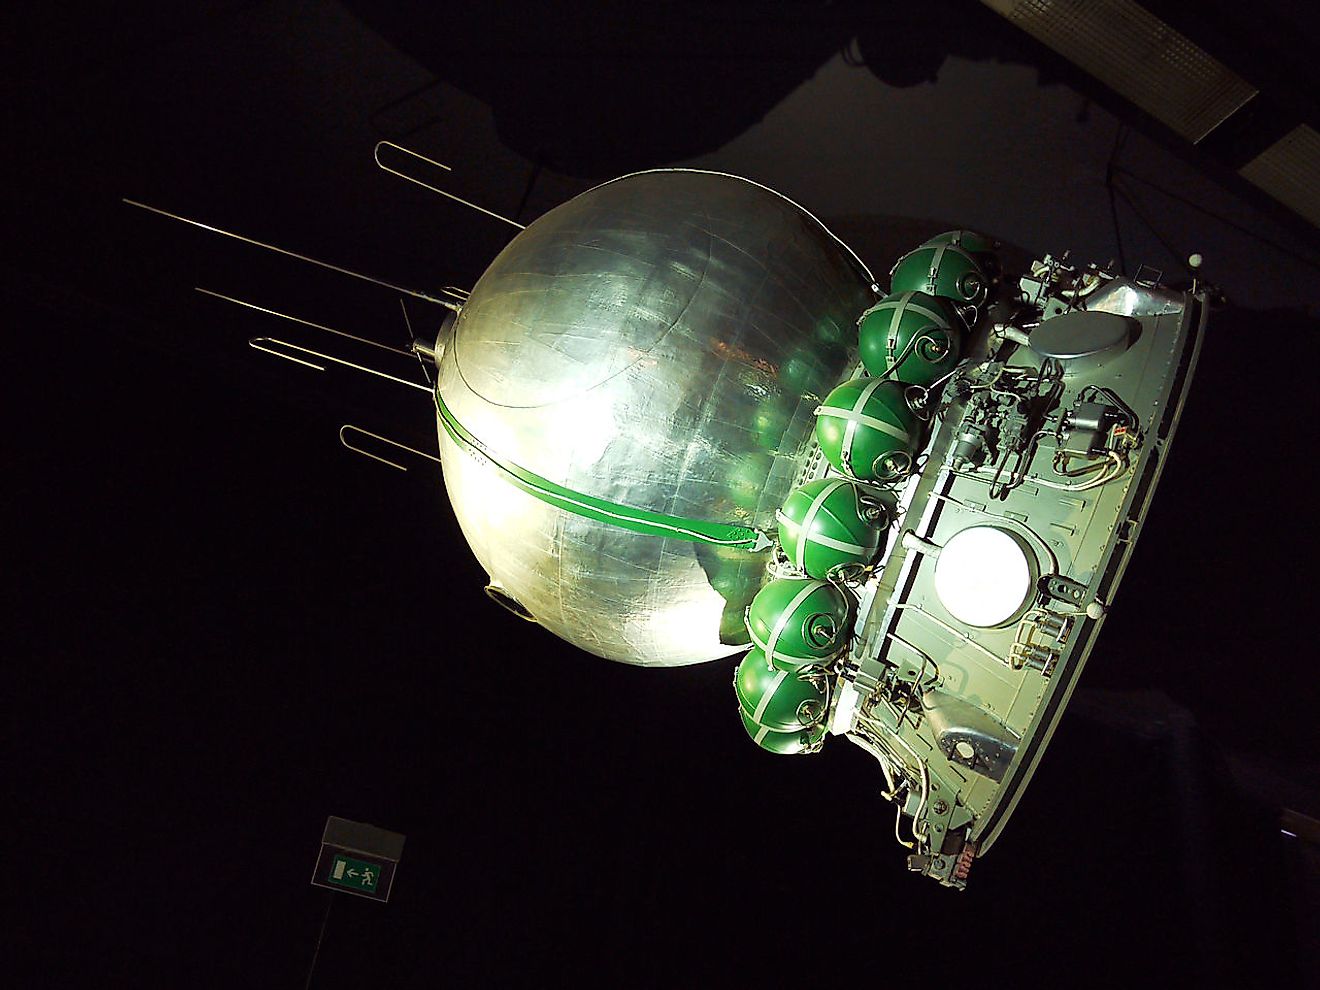 Mockup of the spacecraft Vostok-1 (1961), Museum of Air and Space Paris, Le Bourget (France). Image credit: Pline/Wikimedia.org